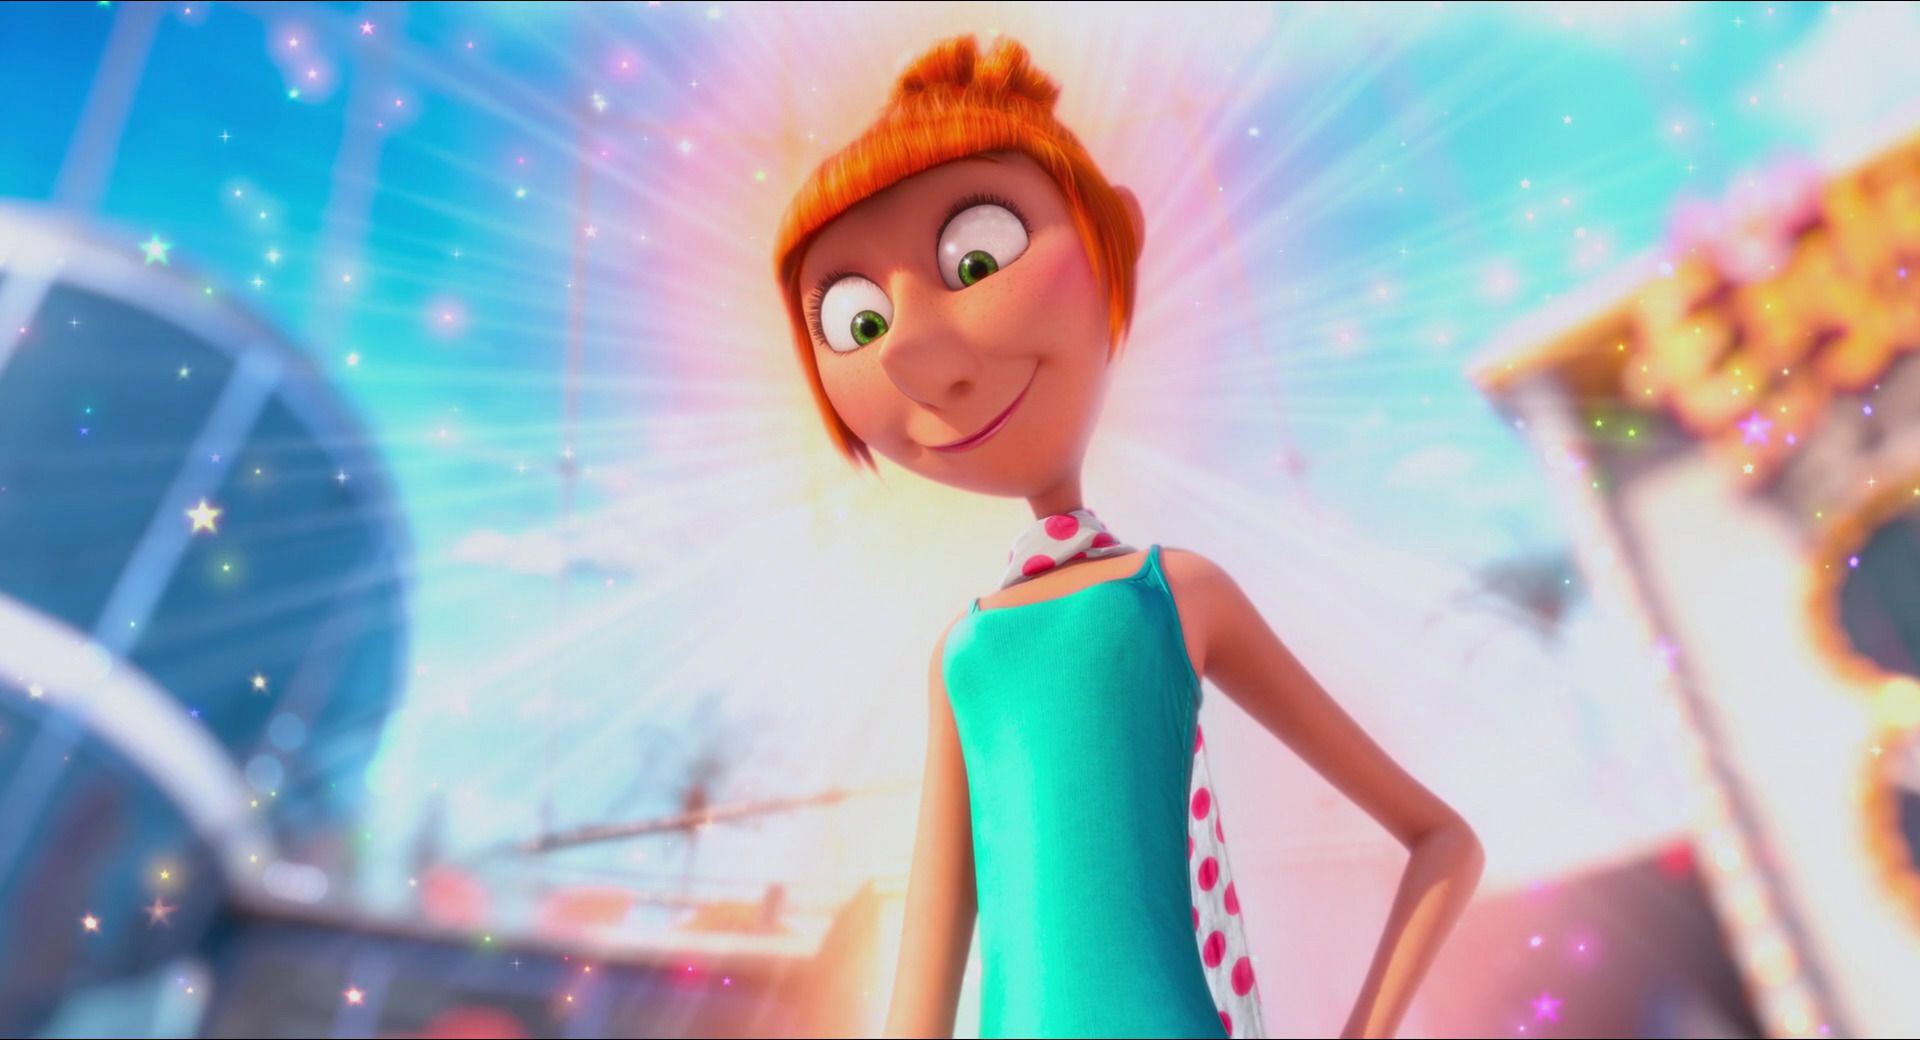 The MyersBriggs® Personality Types of Illumination Animation Characters